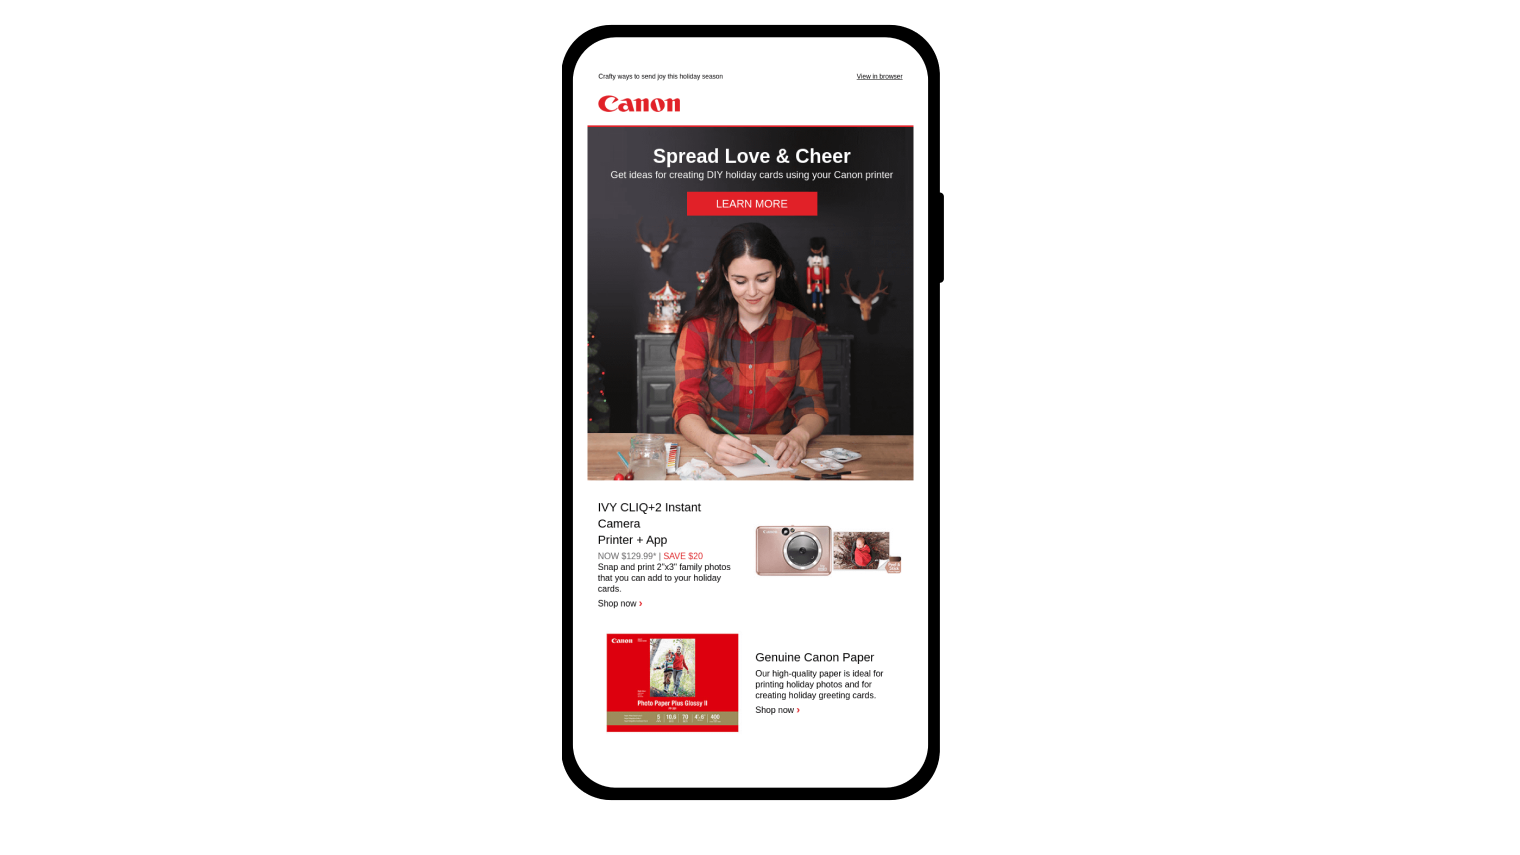 Here’s an email that Canon sends to customers